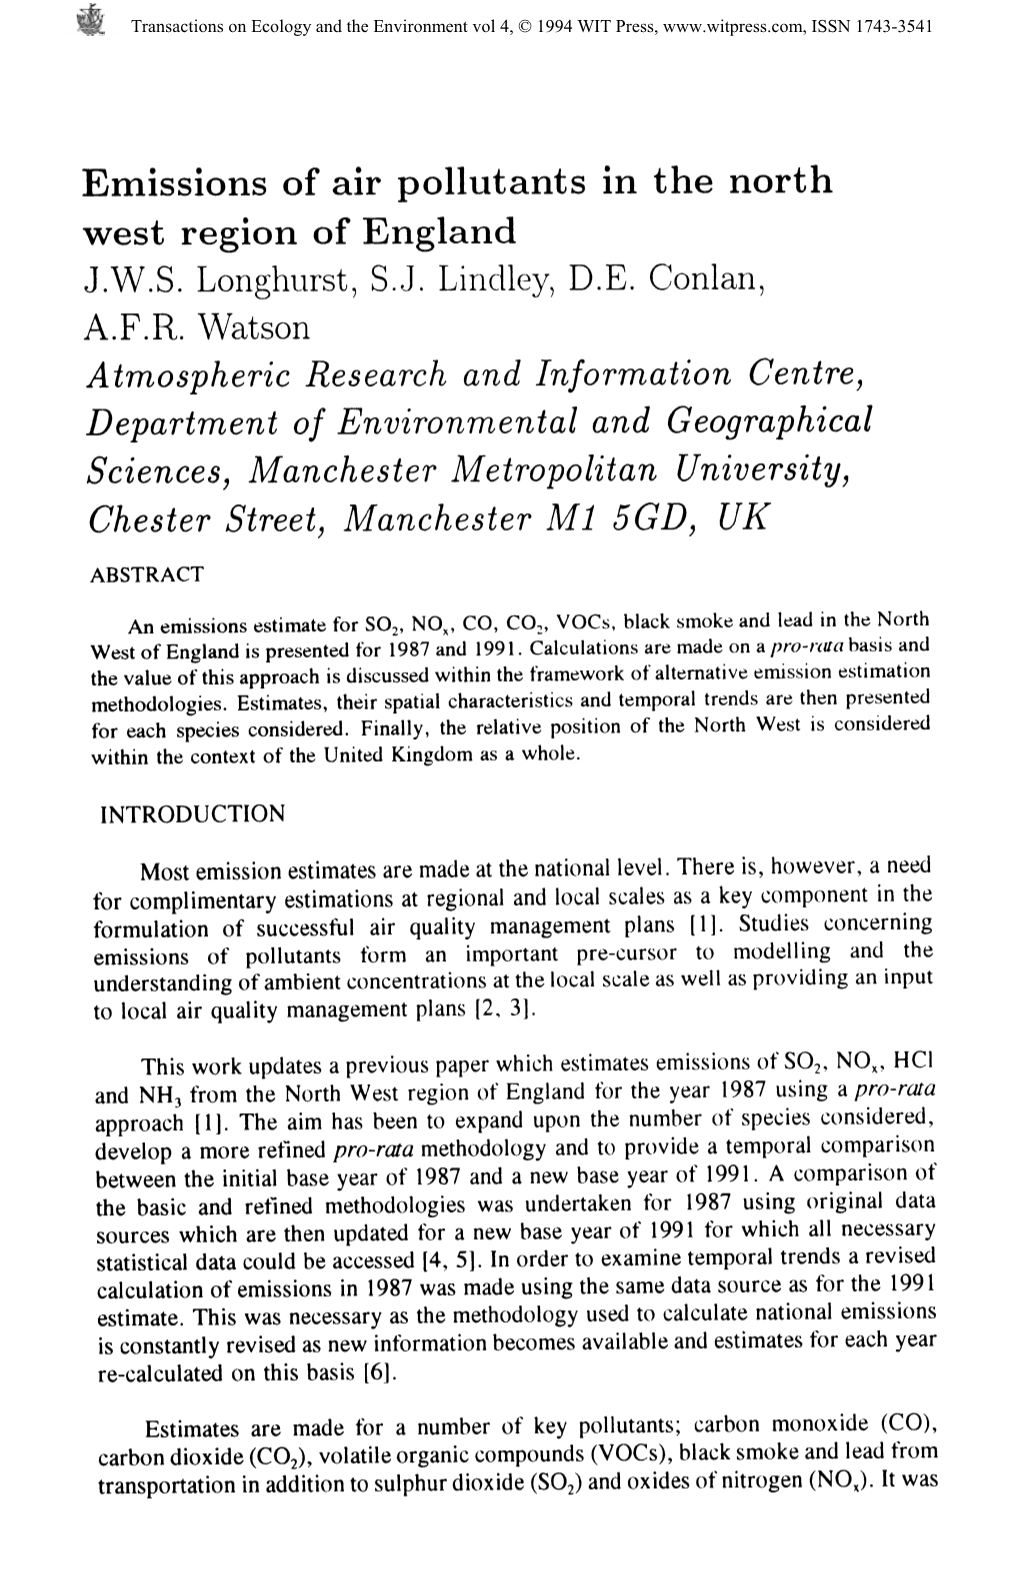 Emissions of Air Pollutants in the North West Region of England J.W.S